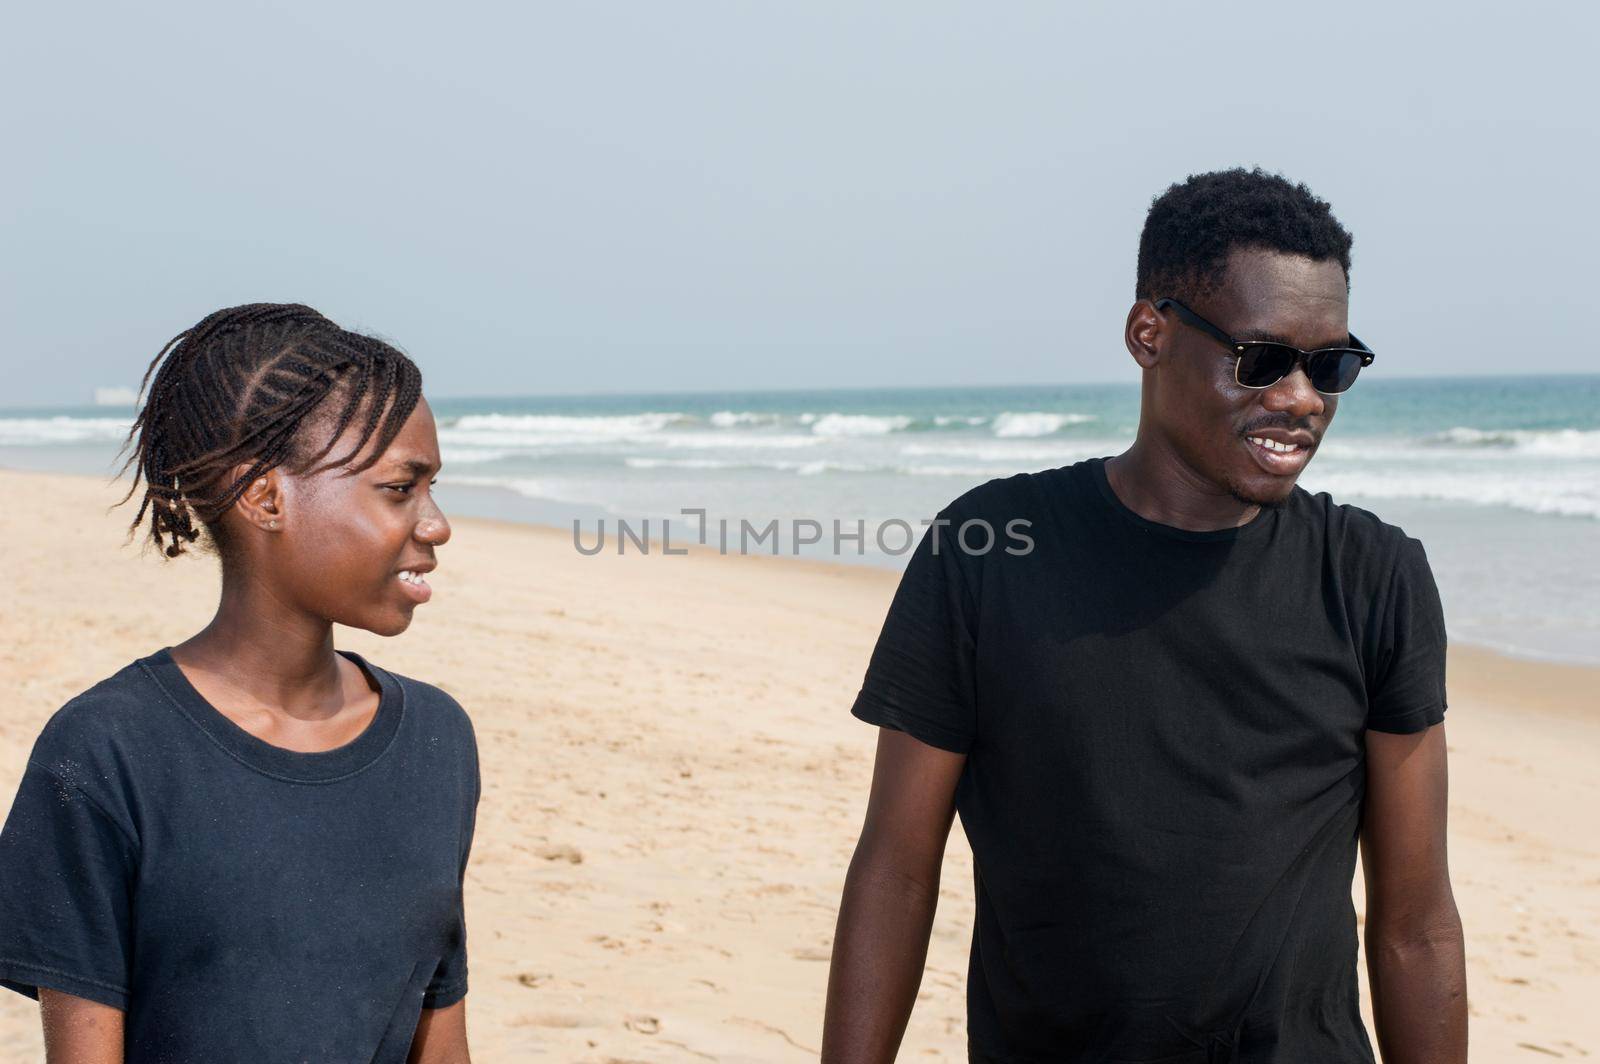 two young people one in black tee shirt and the other in blue t-shirt standing at the beach smiling.